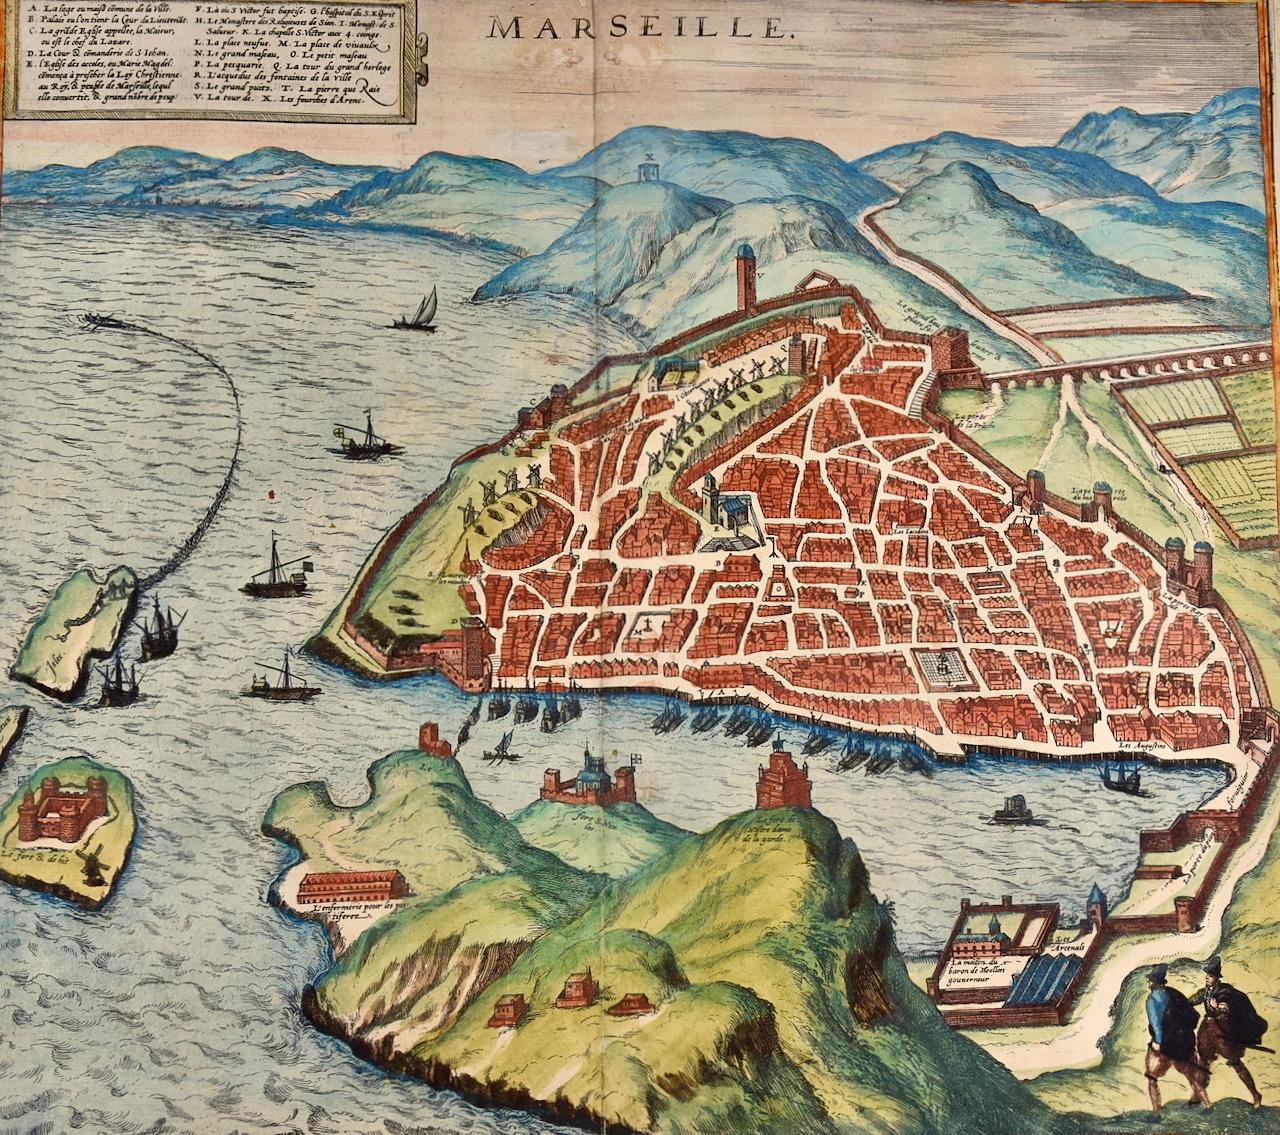 Map of Marseilles, France: A 16th Century Hand-colored Map by Braun & Hogenberg - Print by Frans Hogenberg